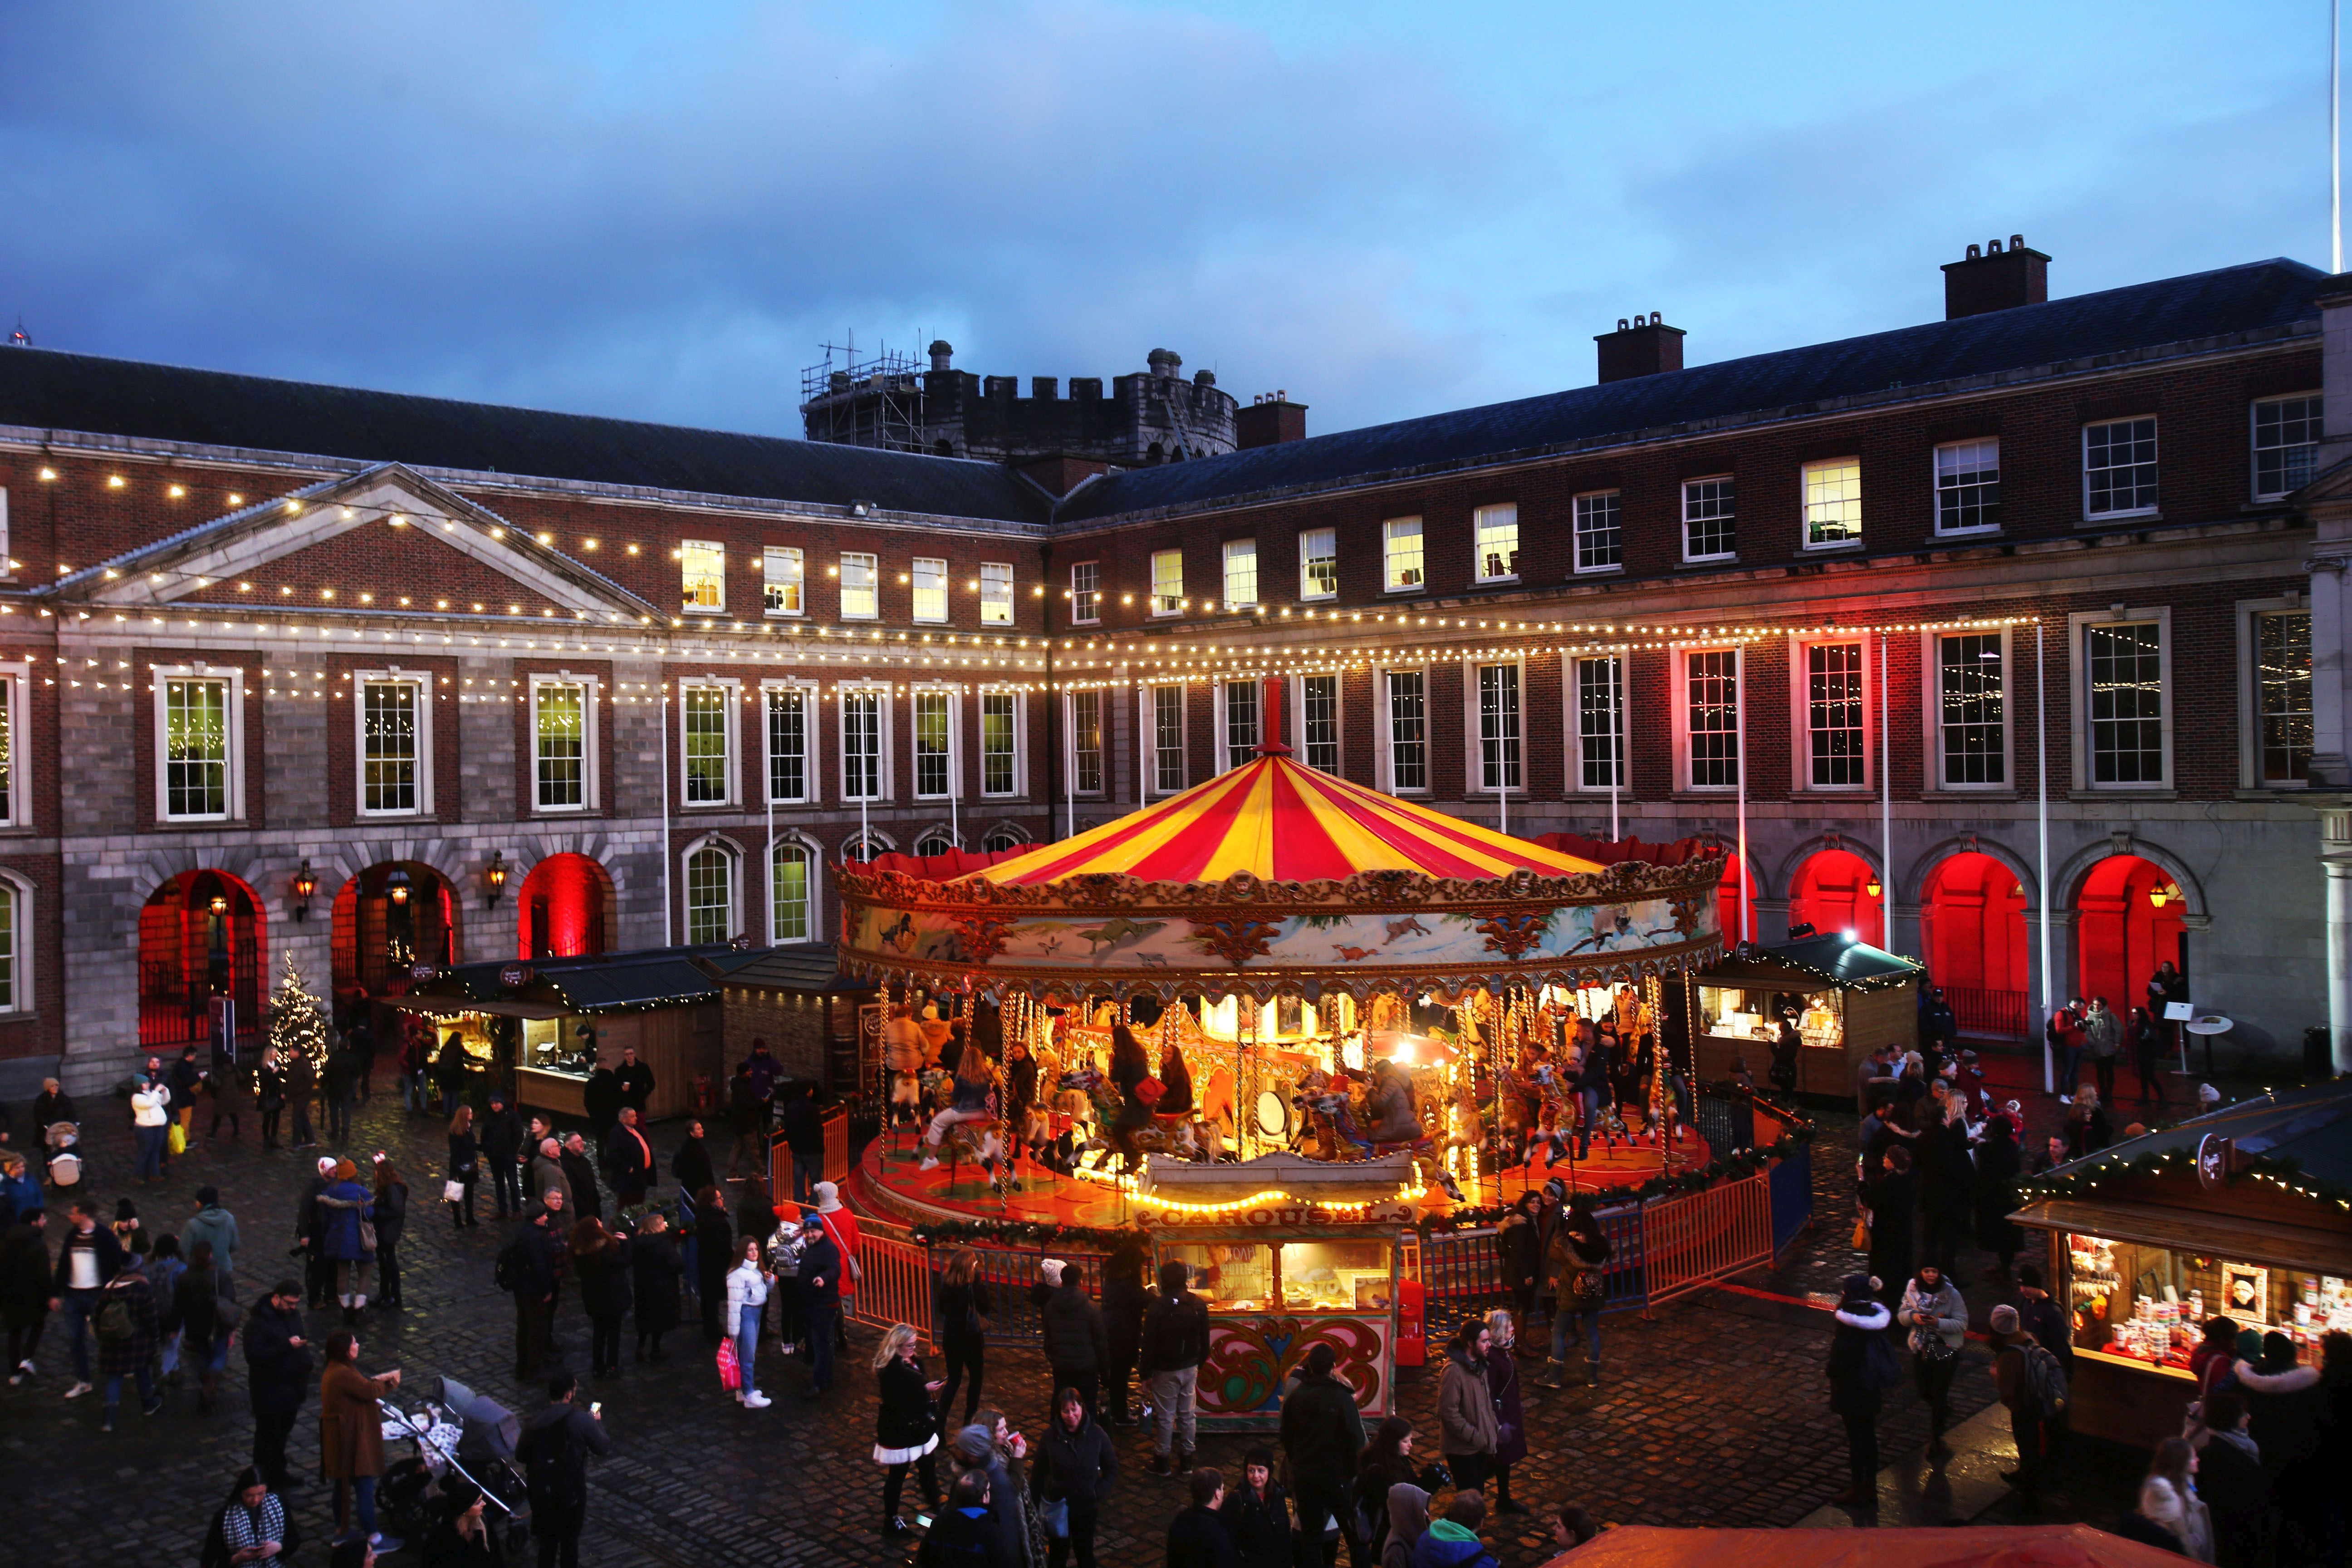 Enjoy this Winter in Dublin at Christmas at the Castle, featuring a Vintage Carousel, great food and drink, arts and crafts stalls all in a stunning historic location in Dublin City.